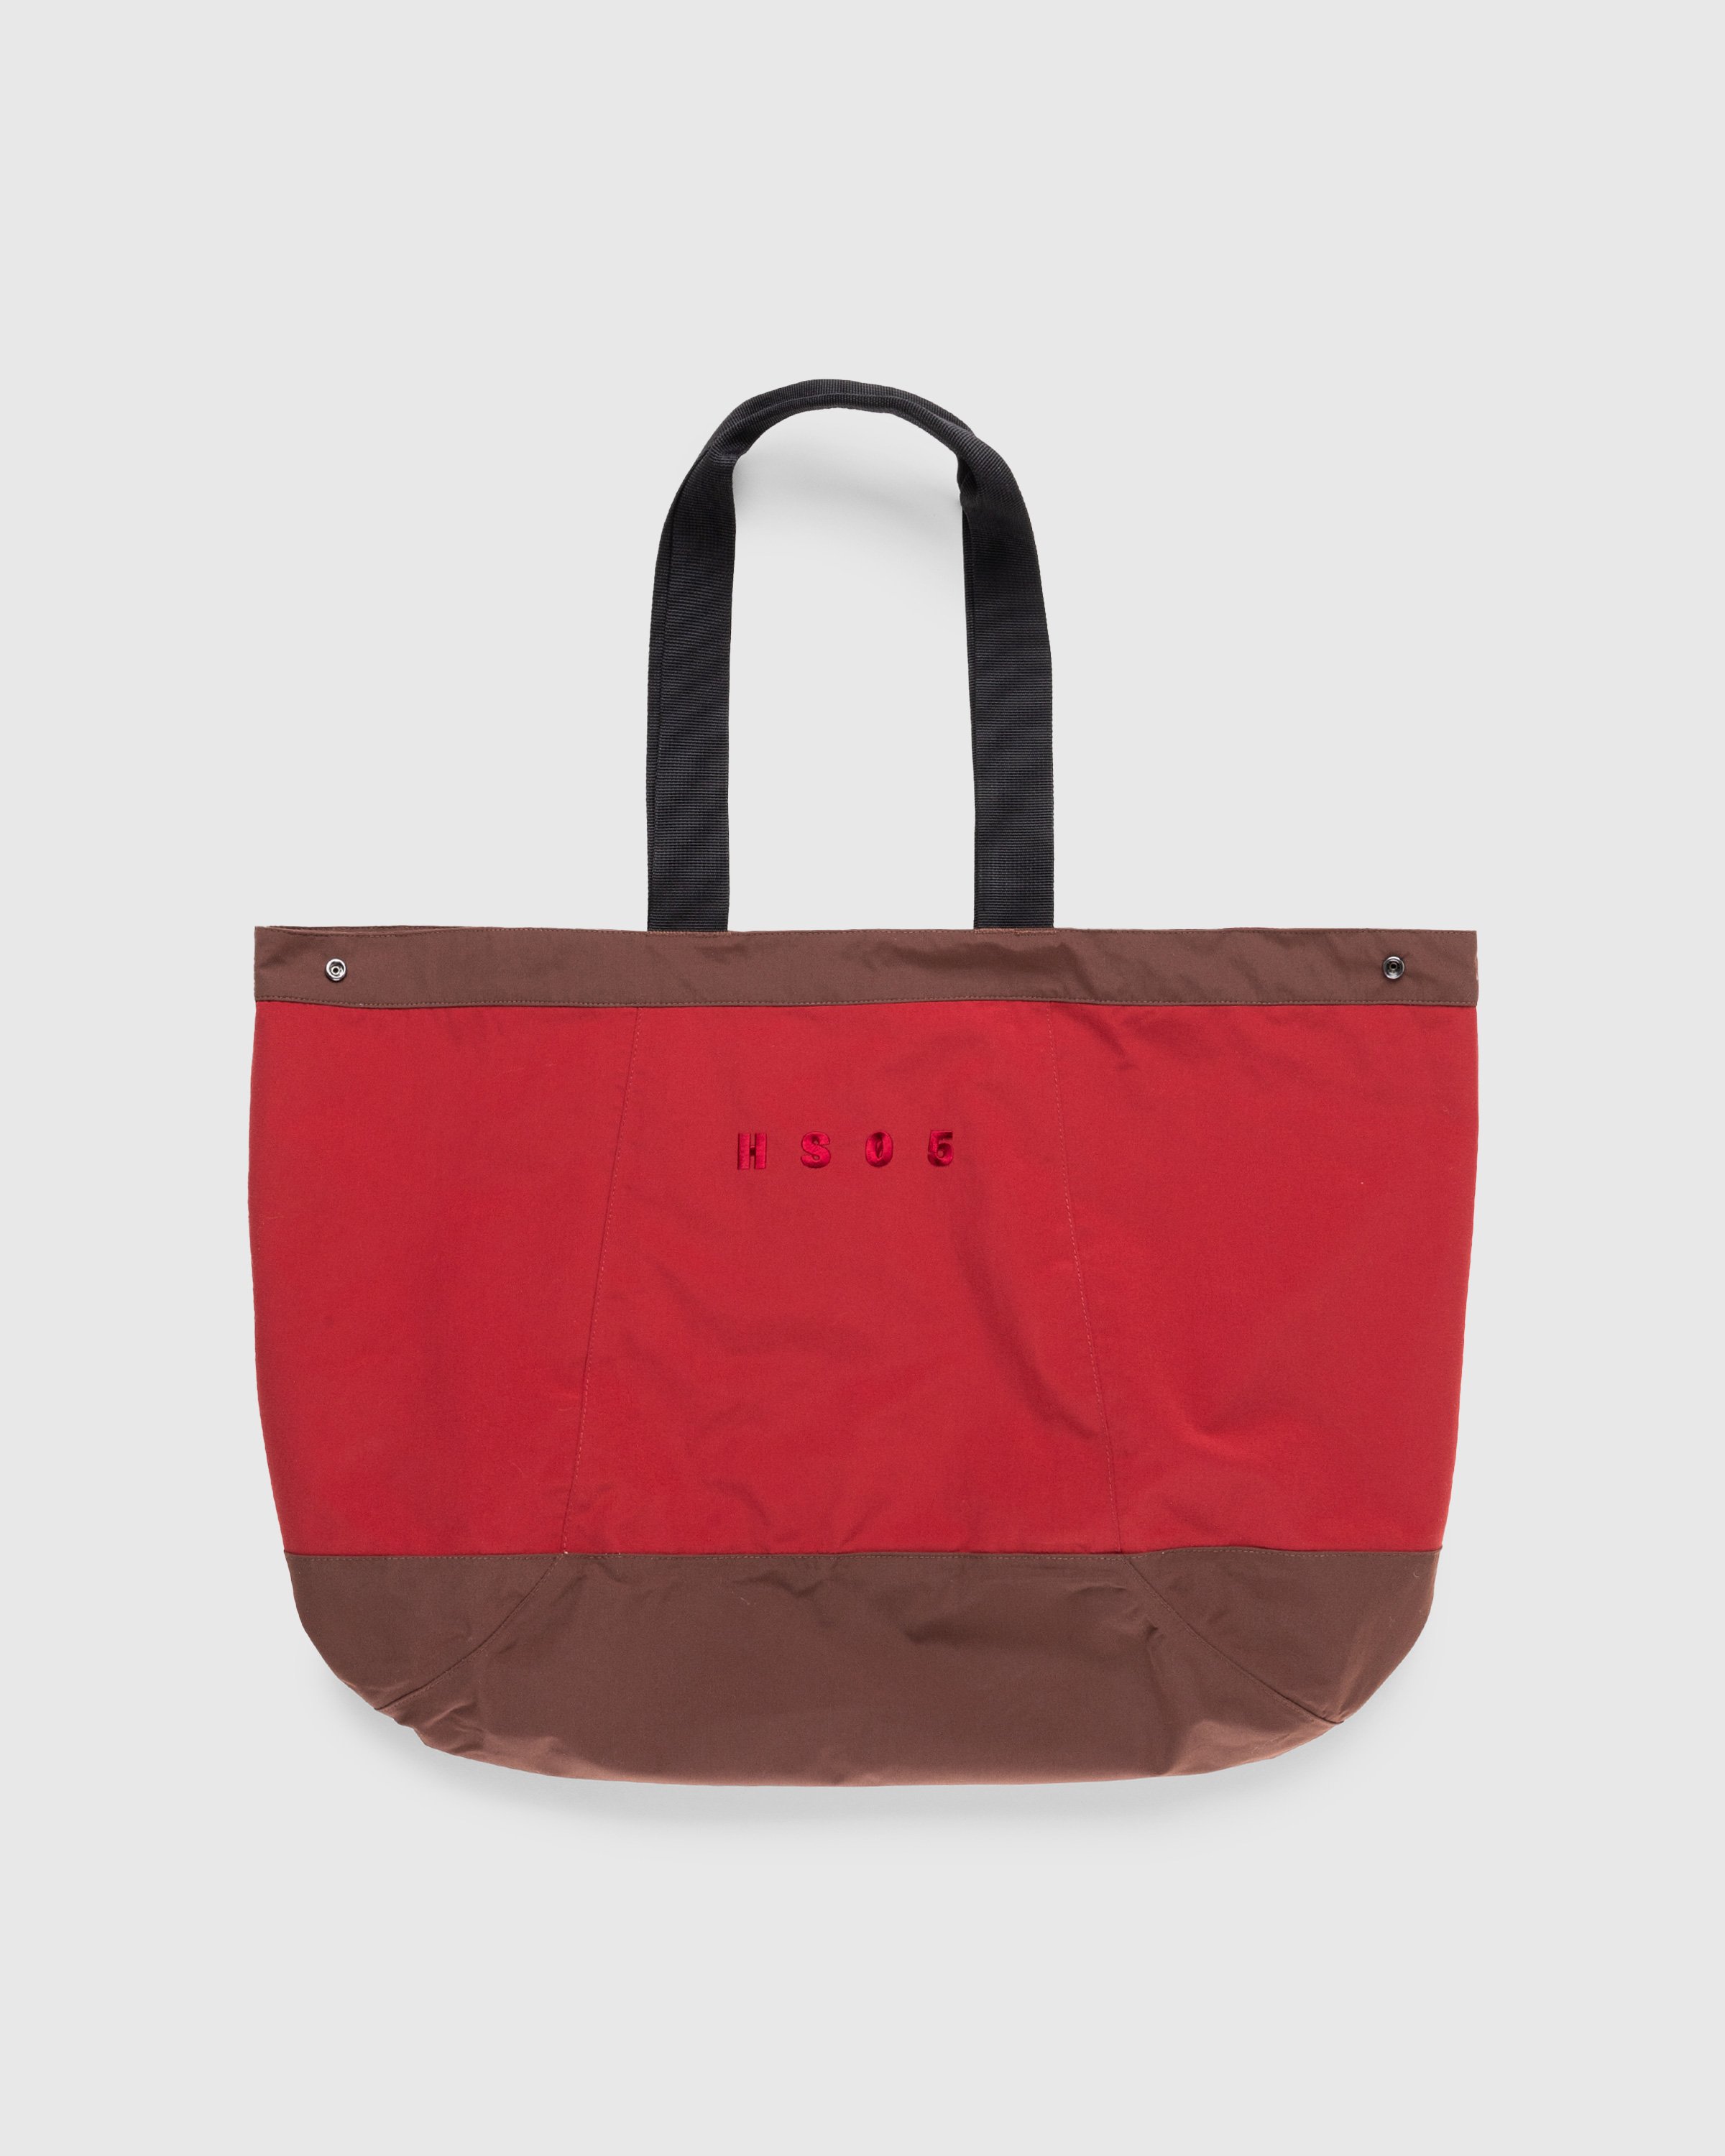 Highsnobiety HS05 - 3-Layer Nylon Tote Bag Red - Accessories - Red - Image 1